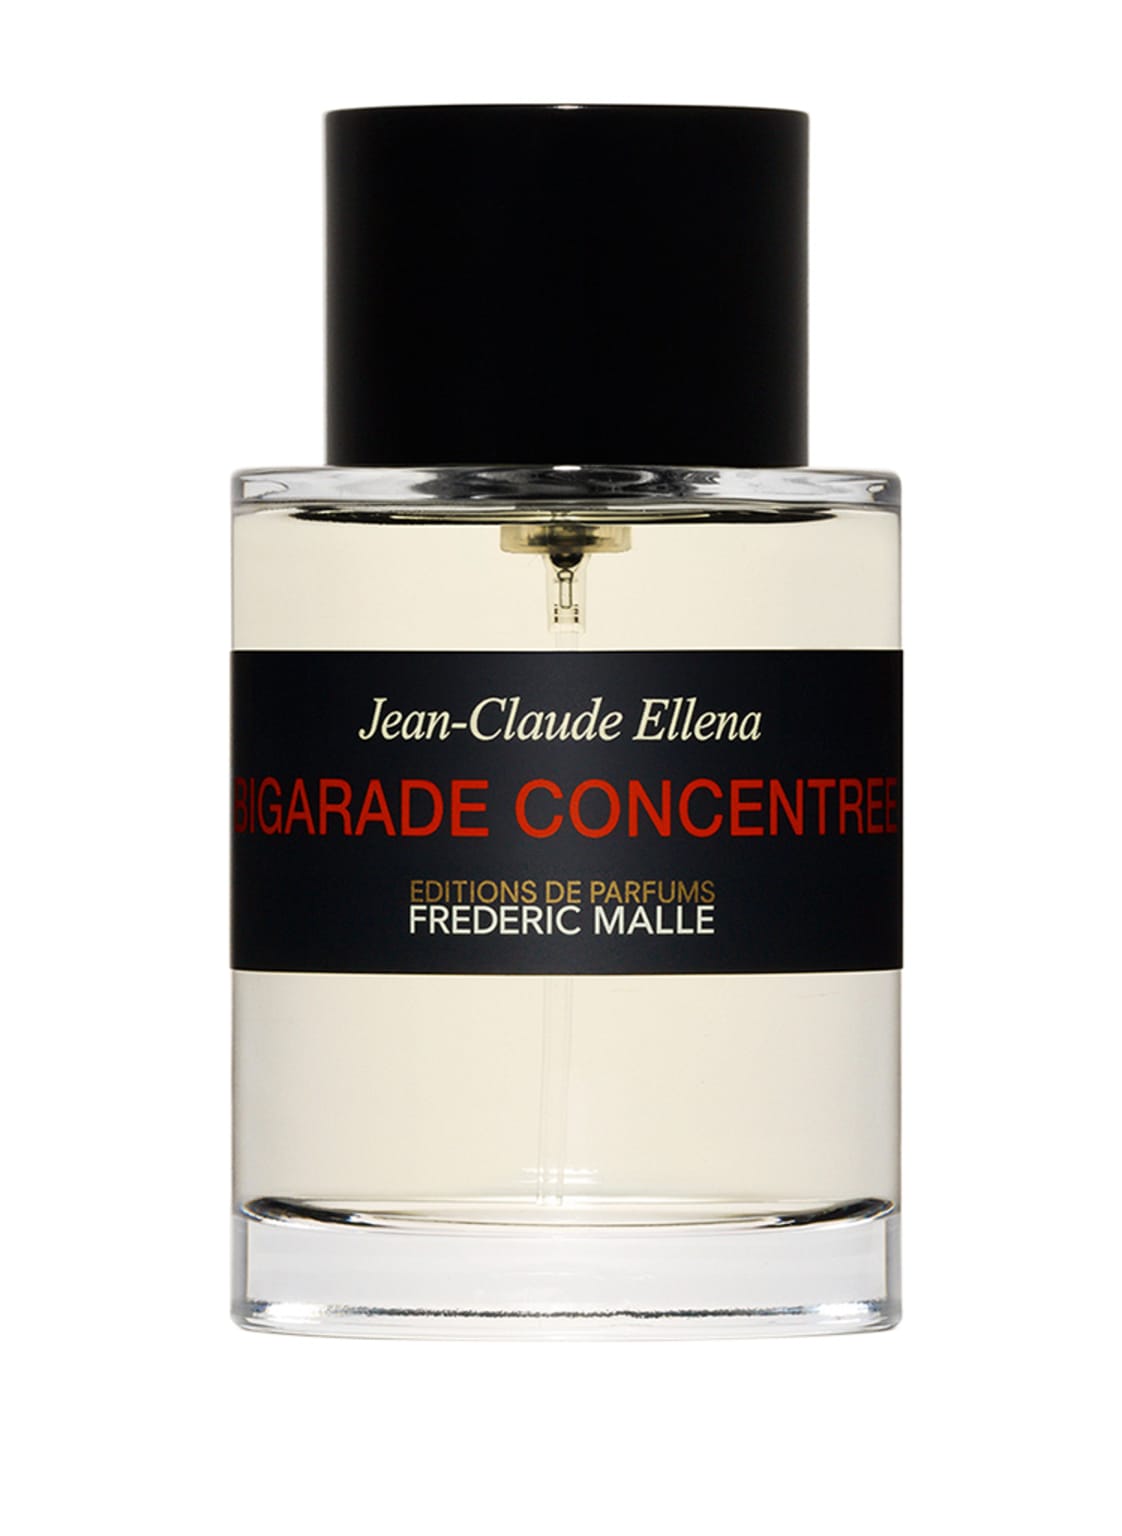 Editions De Parfums Frederic Malle Bigarade Concentree Parfum Spray 50 ml von EDITIONS DE PARFUMS FREDERIC MALLE